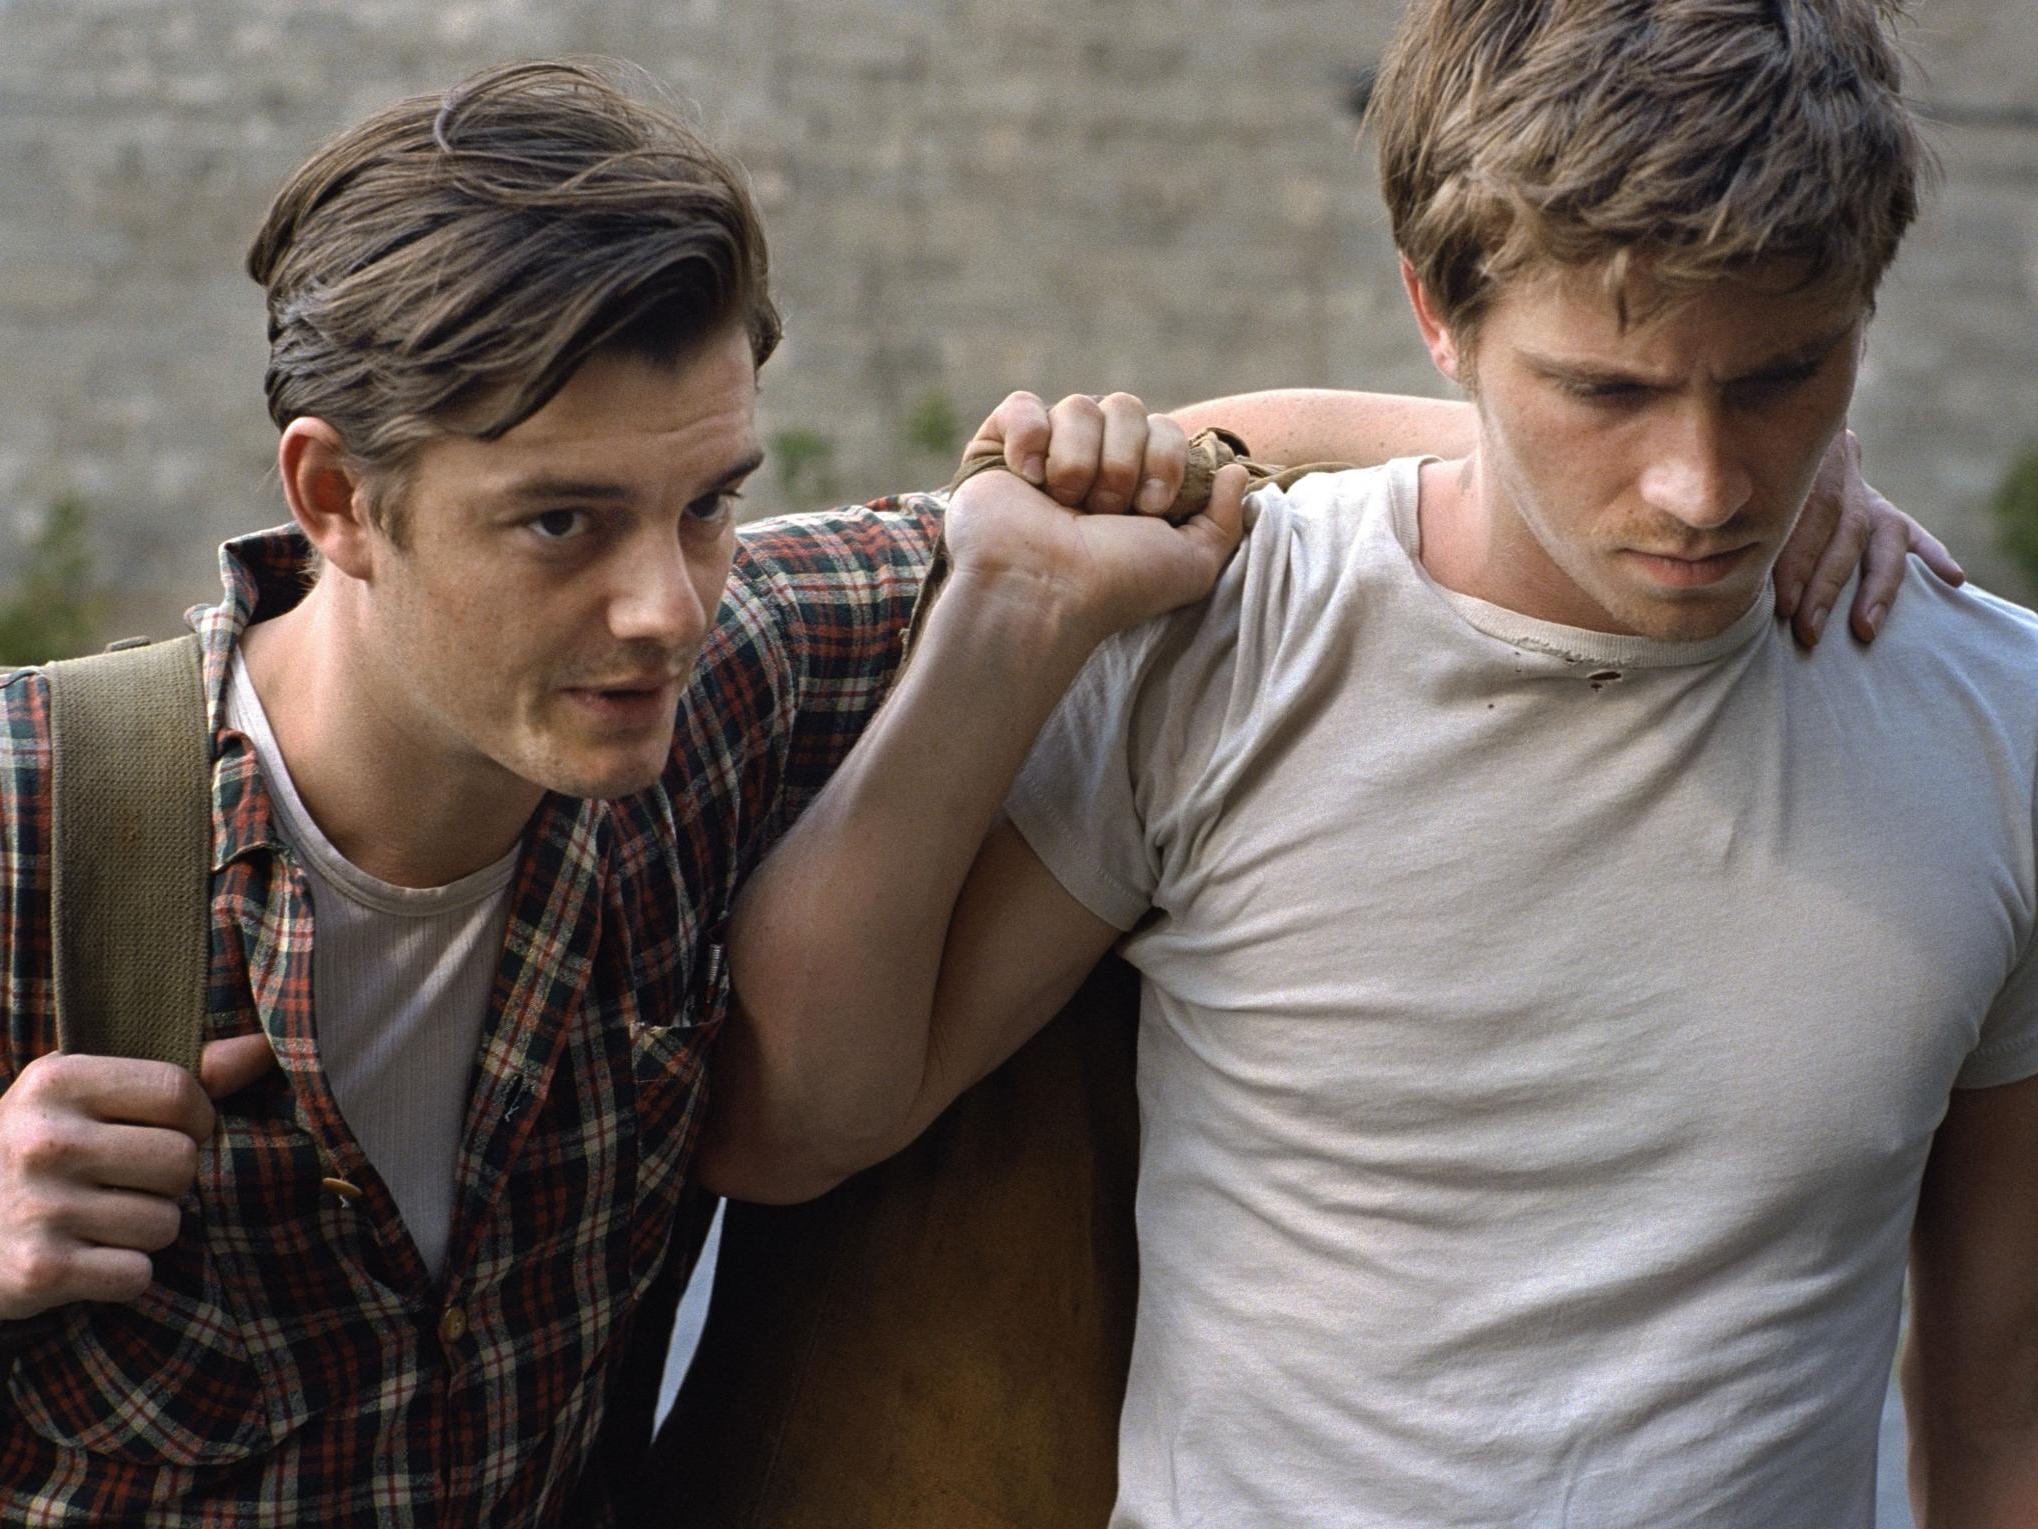 An ‘awful tall’ Brit: Sam Riley and Garrett Hedlund in ‘On the Road’ (Shutterstock)